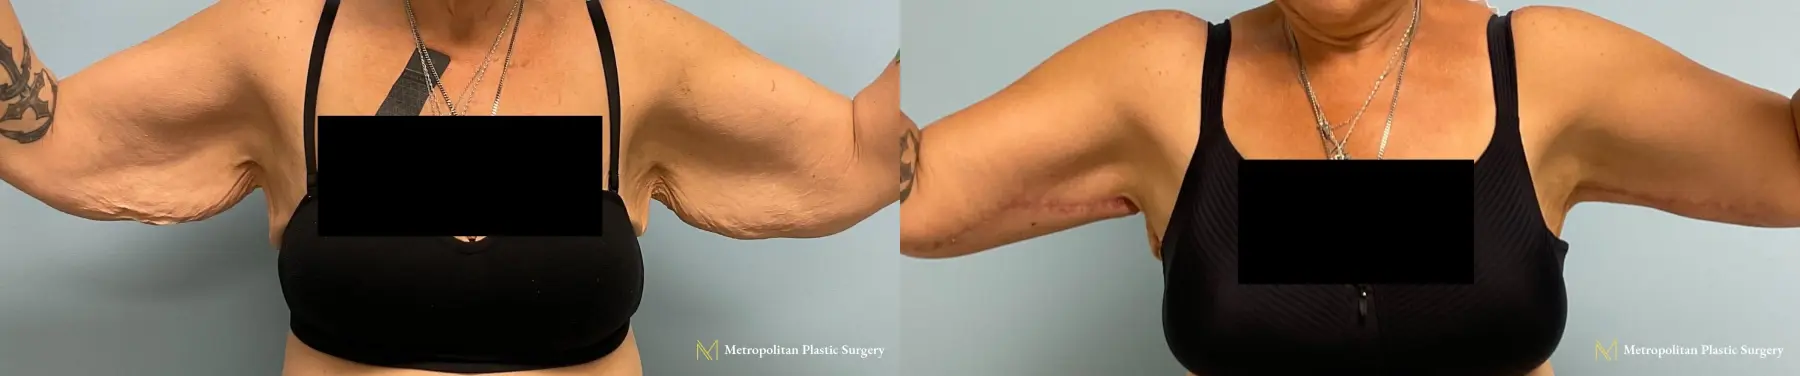 Julia Spears MD Arm Lift Surgery (Brachioplasty) Before and After - Before and After